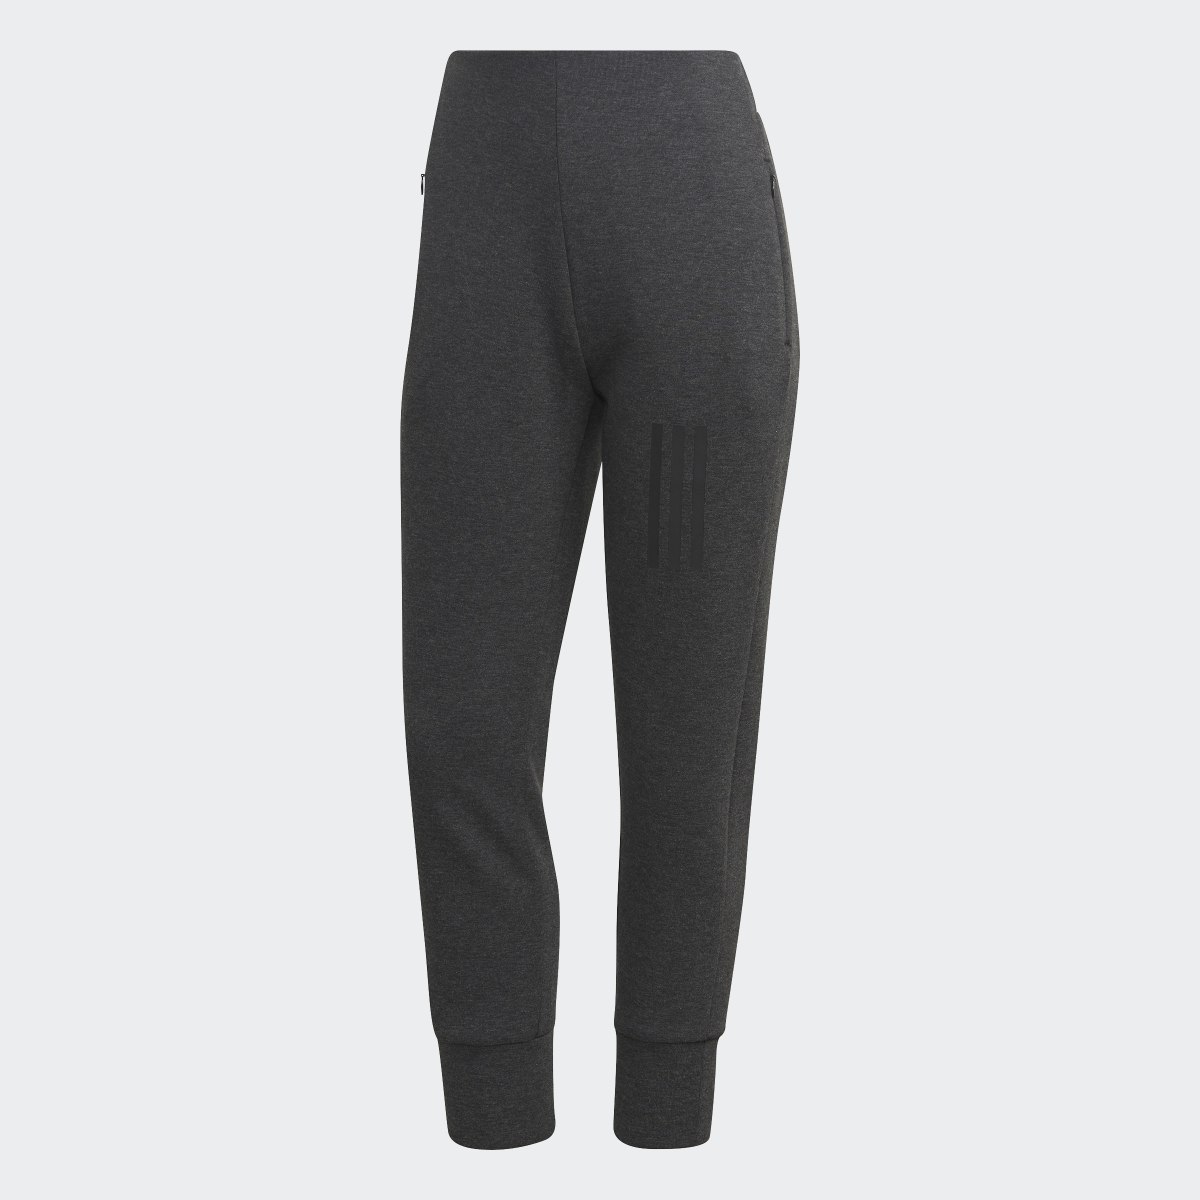 Adidas Mission Victory Slim-Fit High-Waist Tracksuit Bottoms. 5